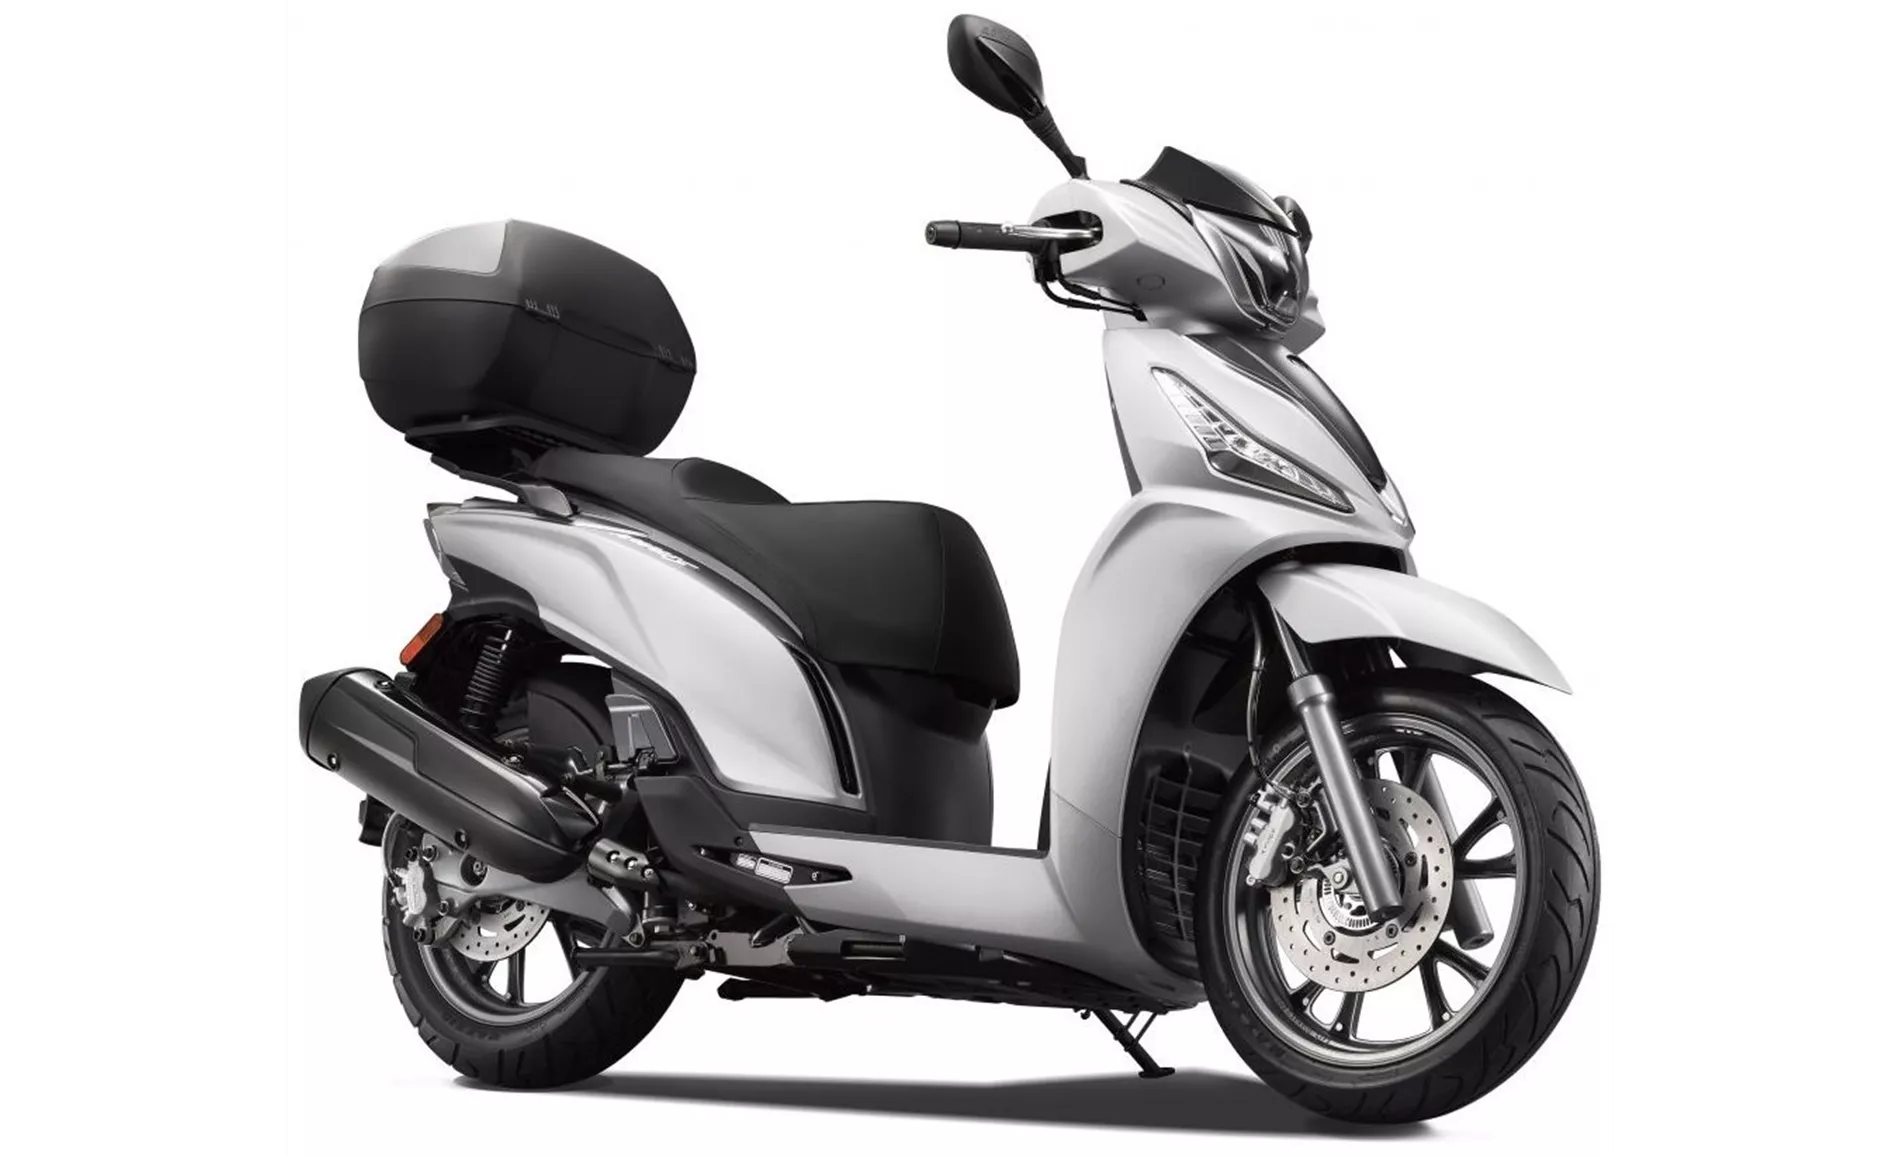 Kymco New People S 300i ABS 2021